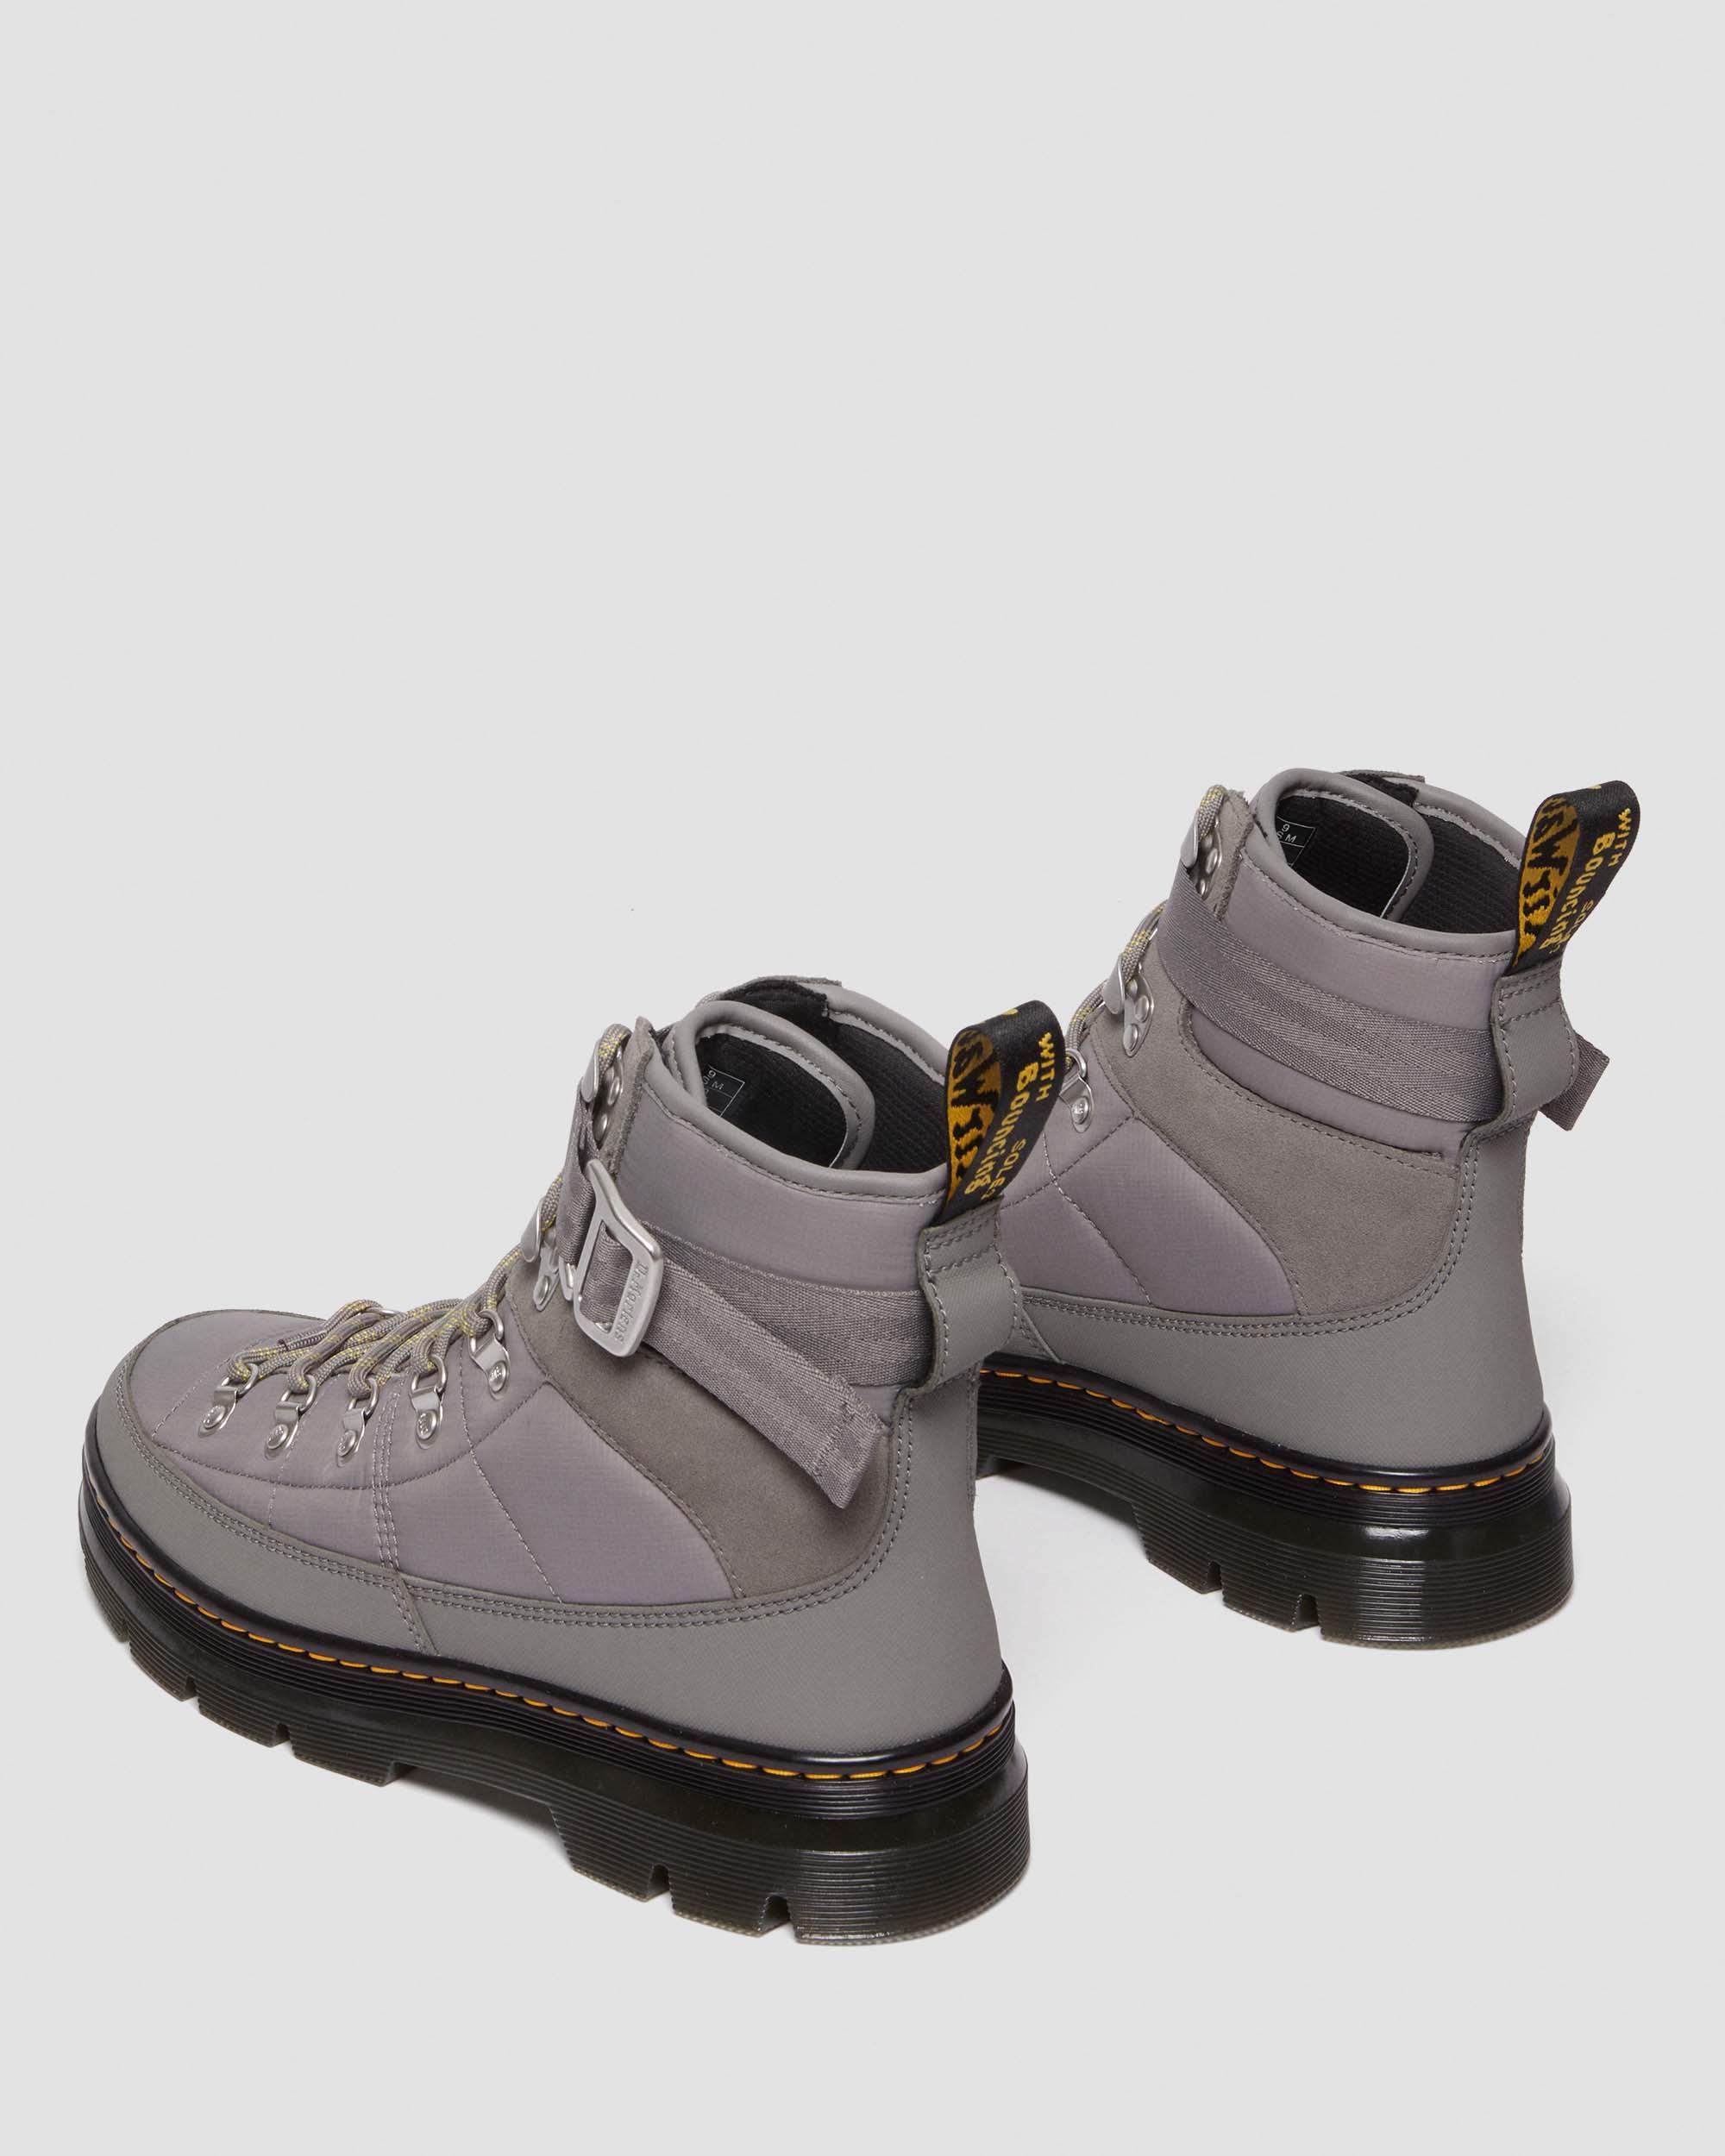 Combs Tech Quilted Casual Boots in NICKEL GREY